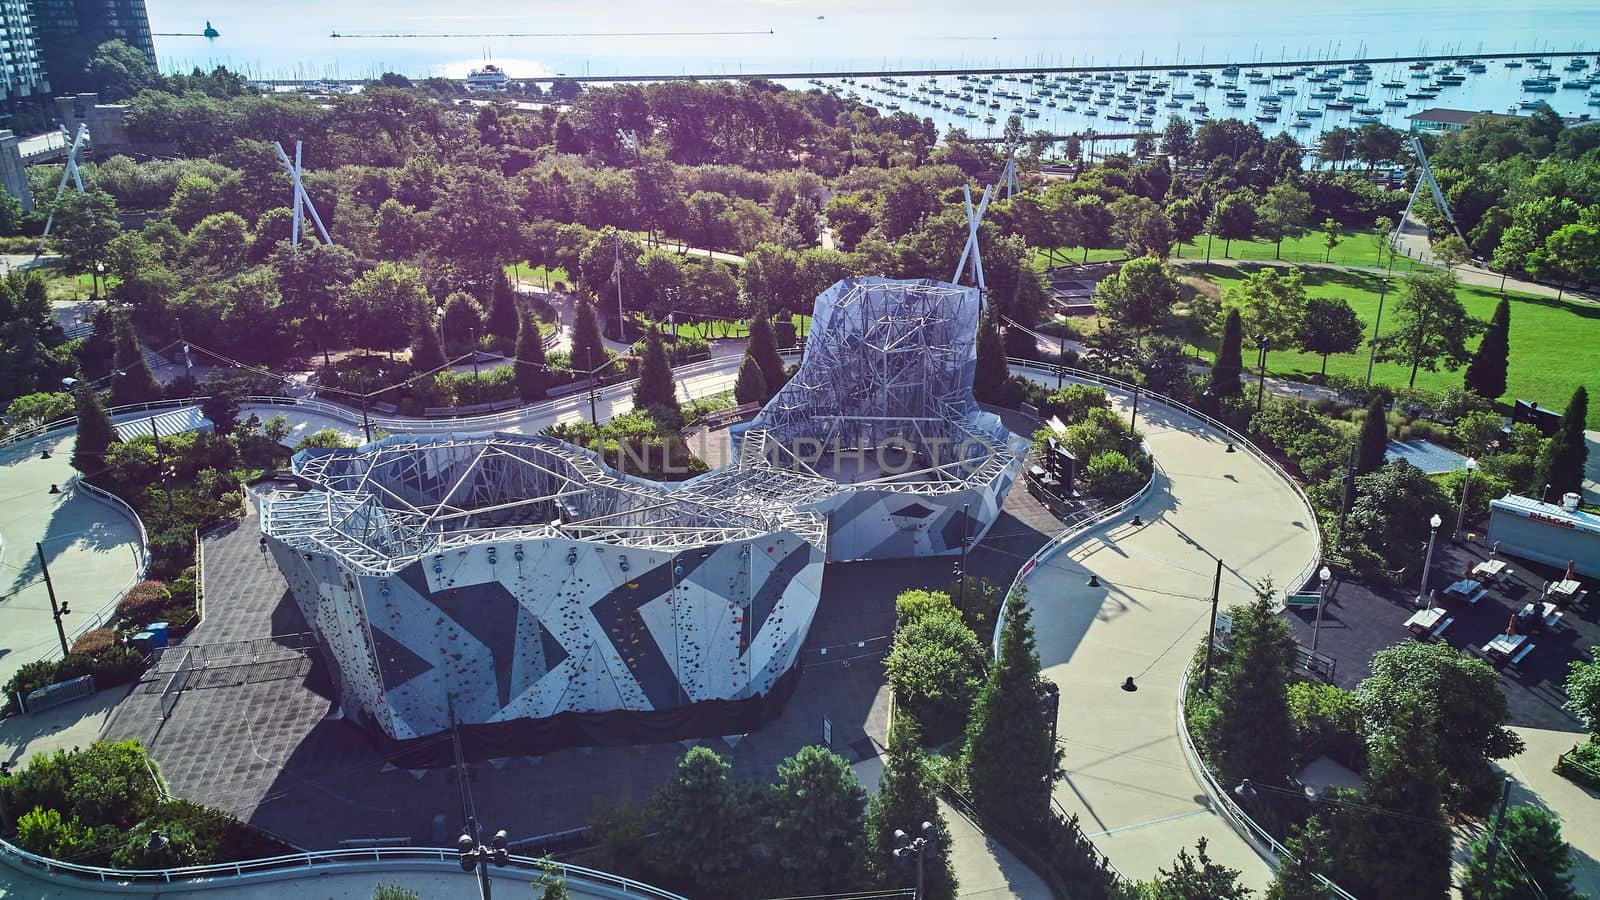 Rock climbing activity center in Millennium Park from above with view of docks and Lake Michigan by njproductions